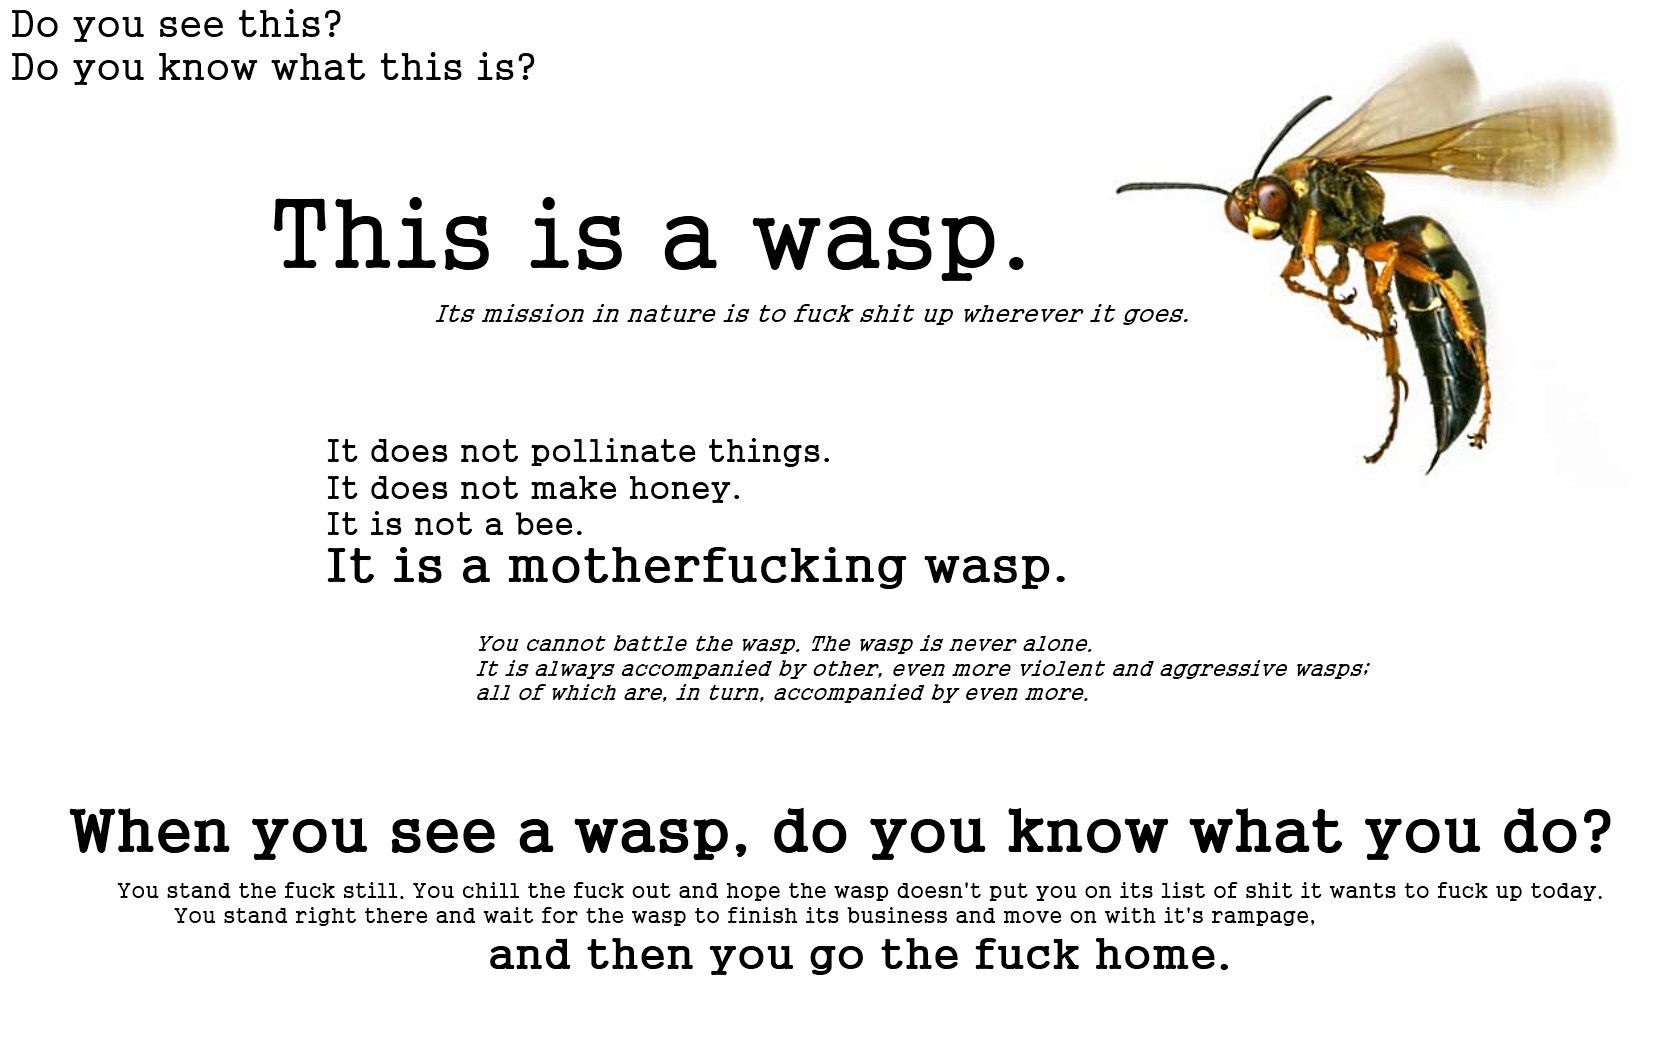 Wasps will f*ck you up